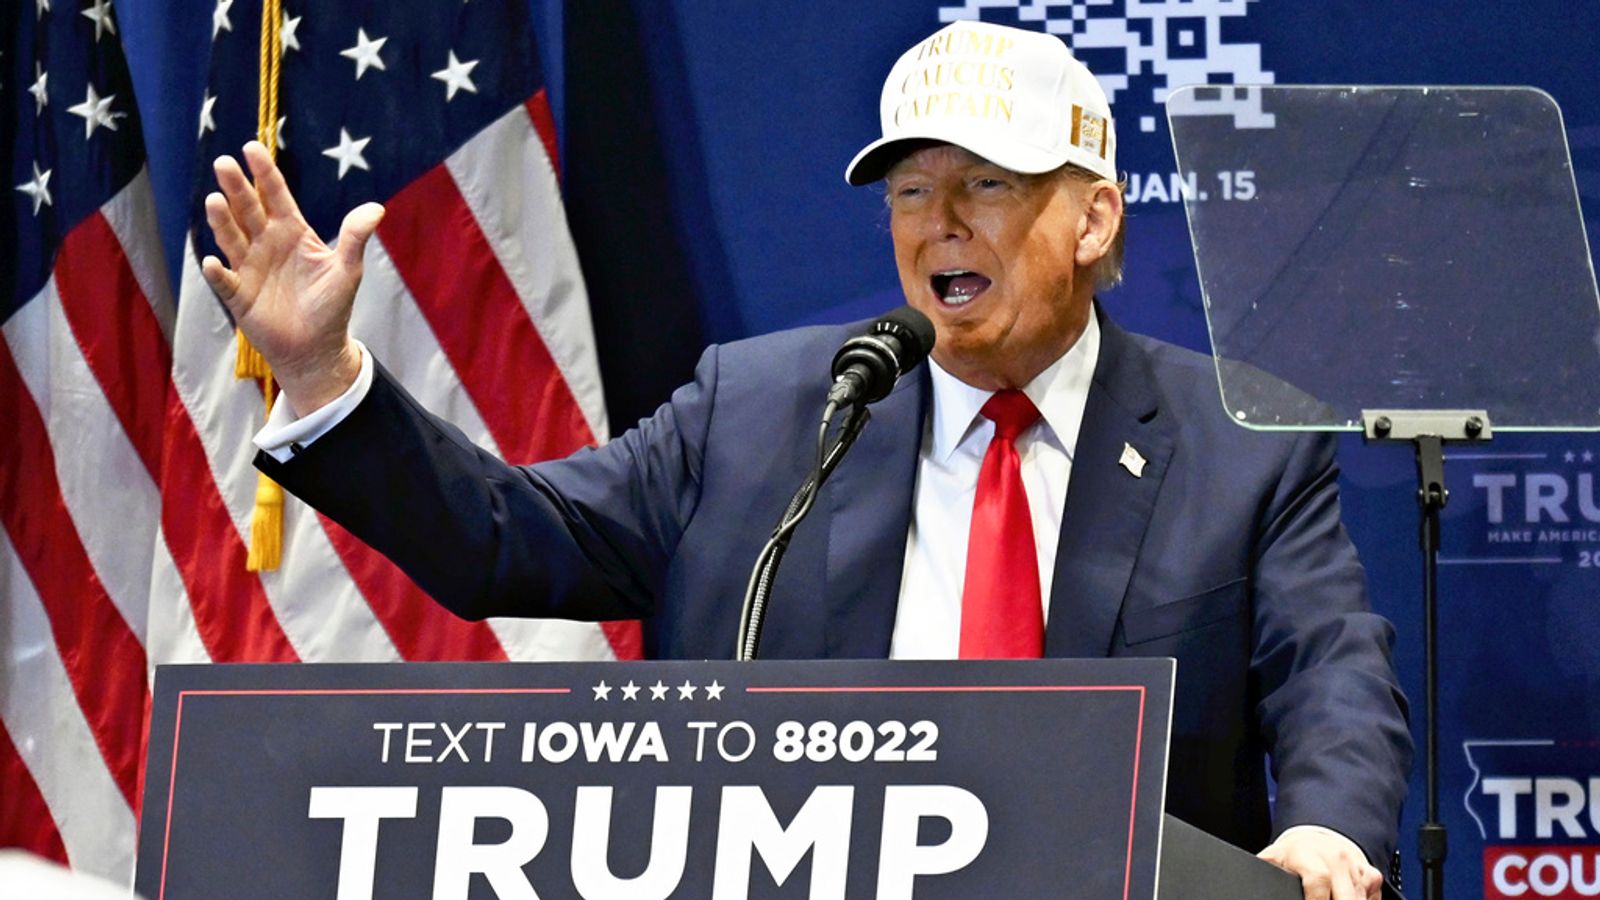 Donald Trump projected to easily win Iowa caucuses as challengers battle for second place